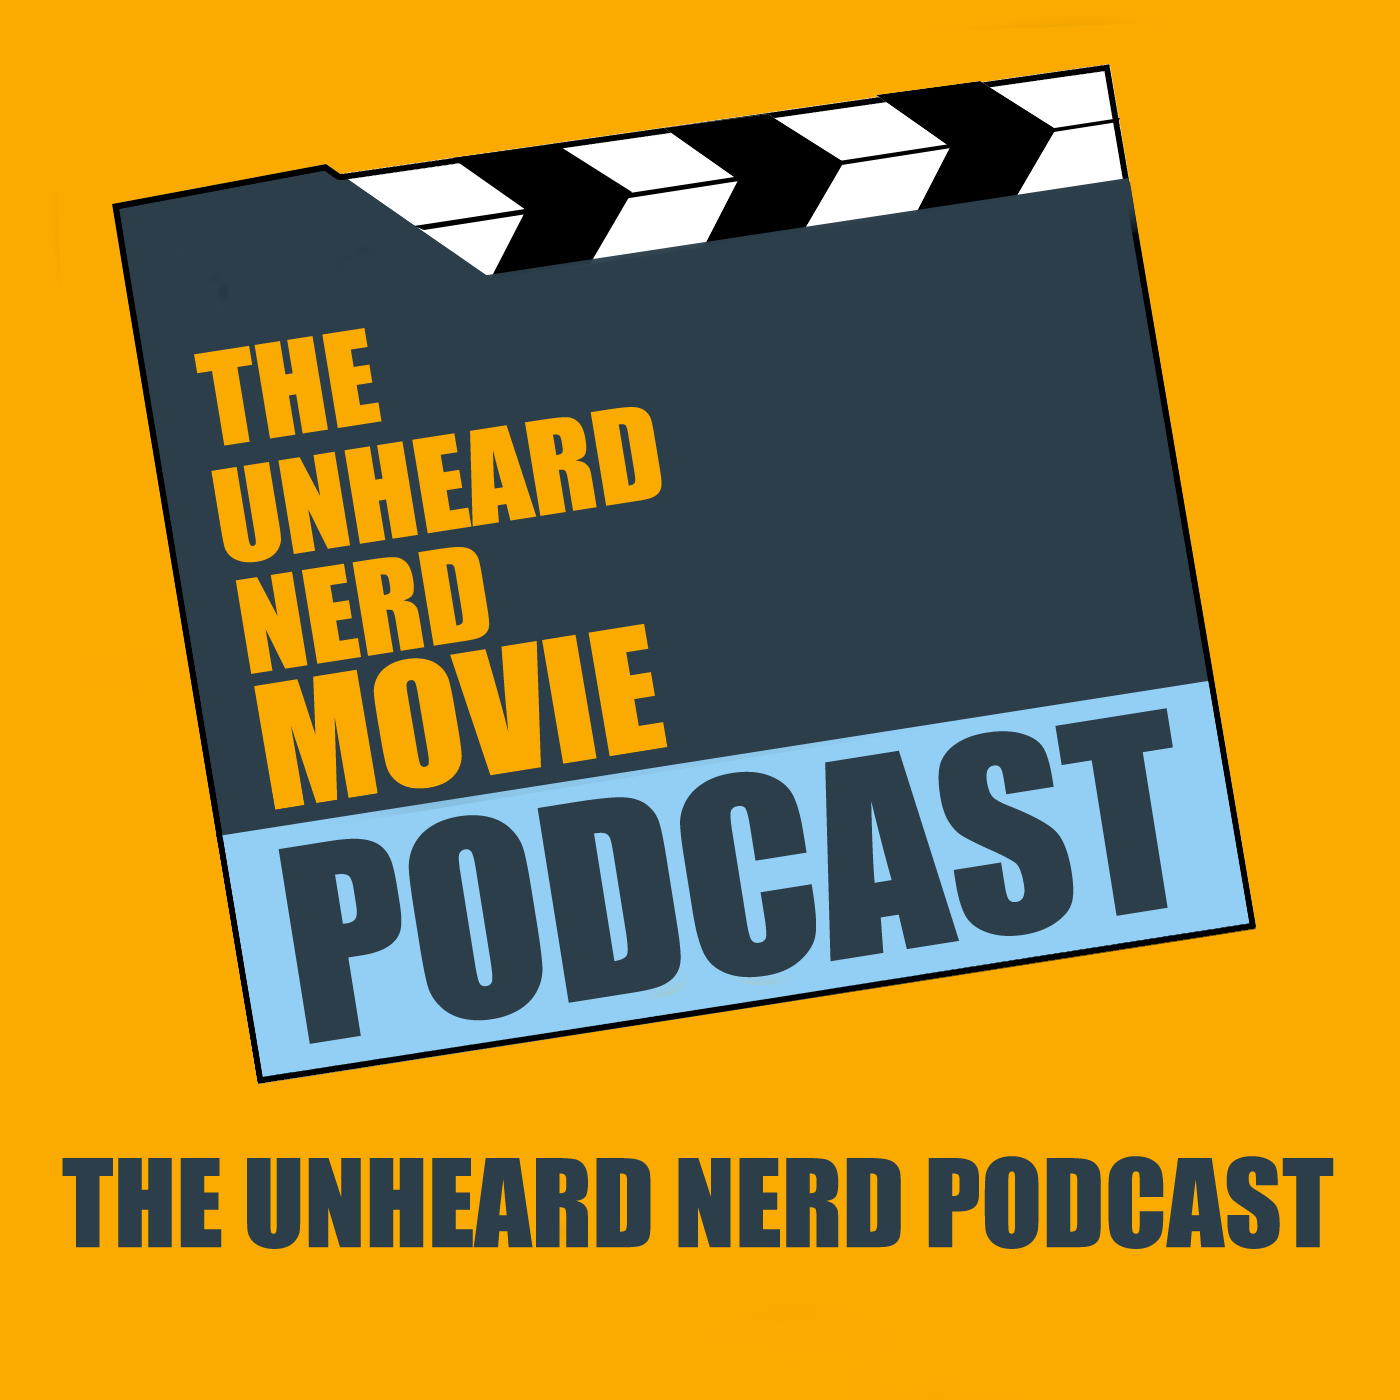 The Unheard Nerd Movie Podcast Episode #5 [Salted Or Sweet?]